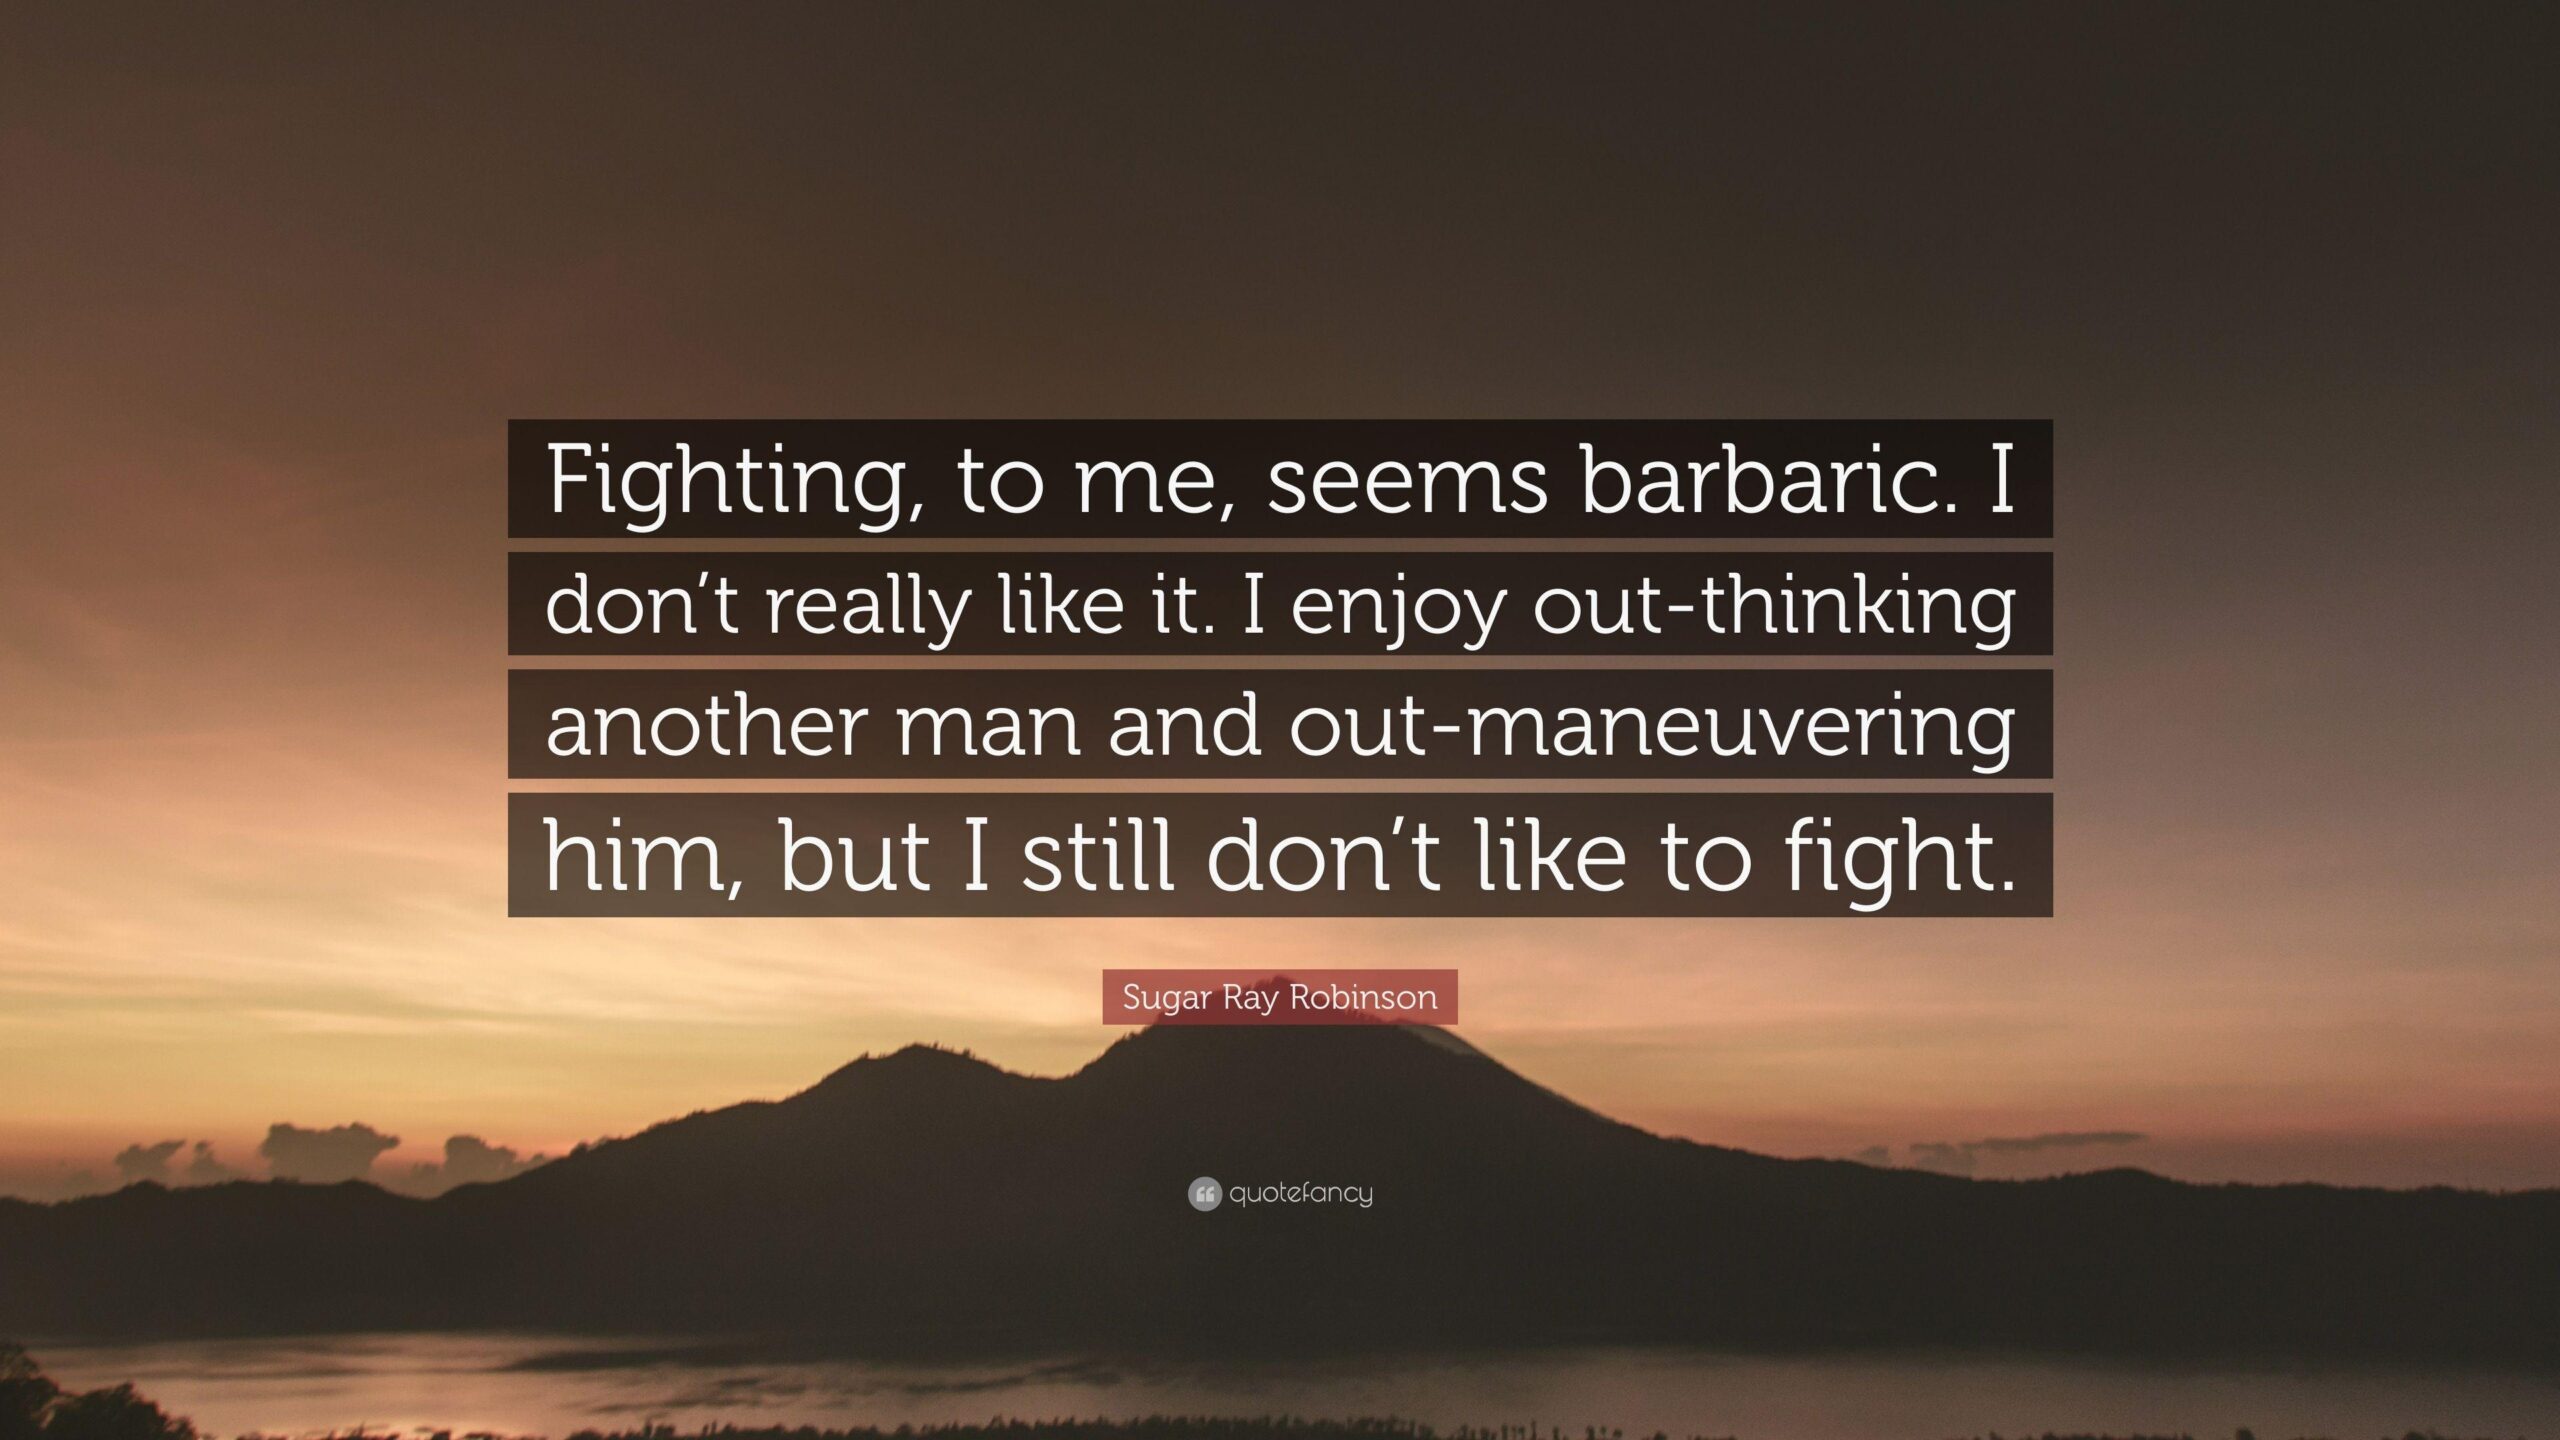 Sugar Ray Robinson Quote “Fighting, to me, seems barbaric I don’t